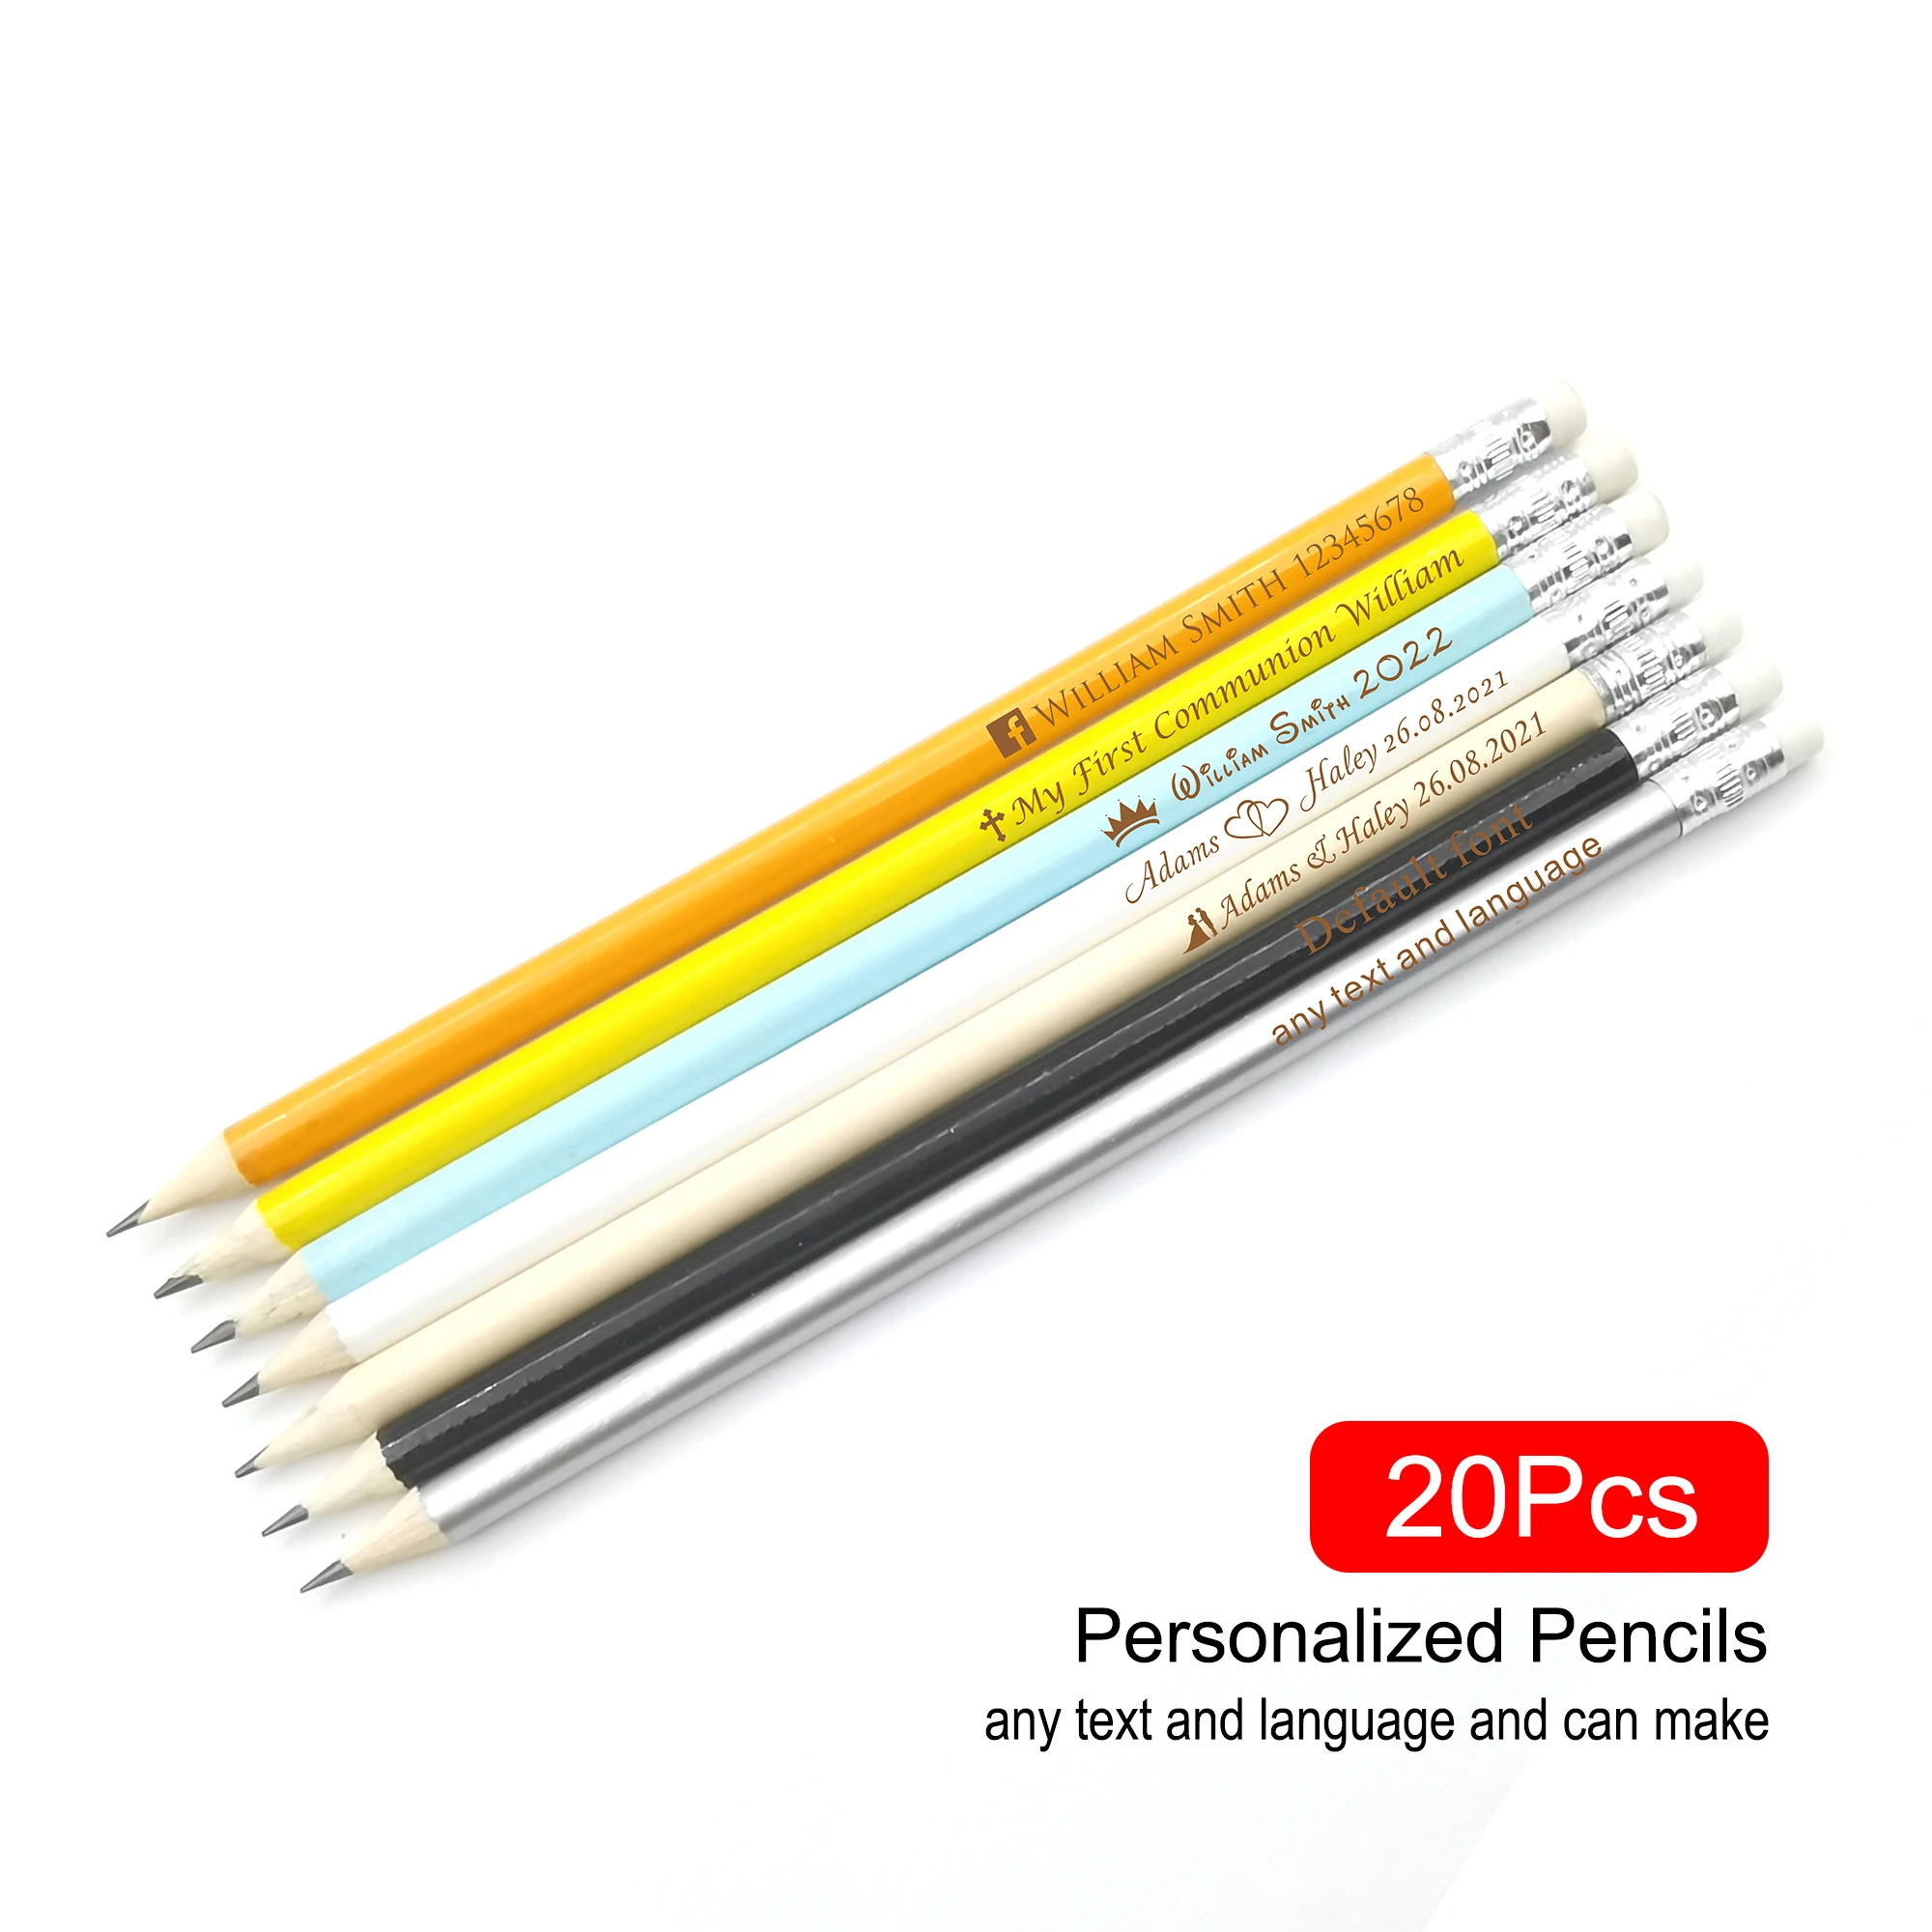 

20Pcs Personalized Pencil Engraved Customize Pencil Wedding Gift Decoration Company Logo Baby Shower Baptism School